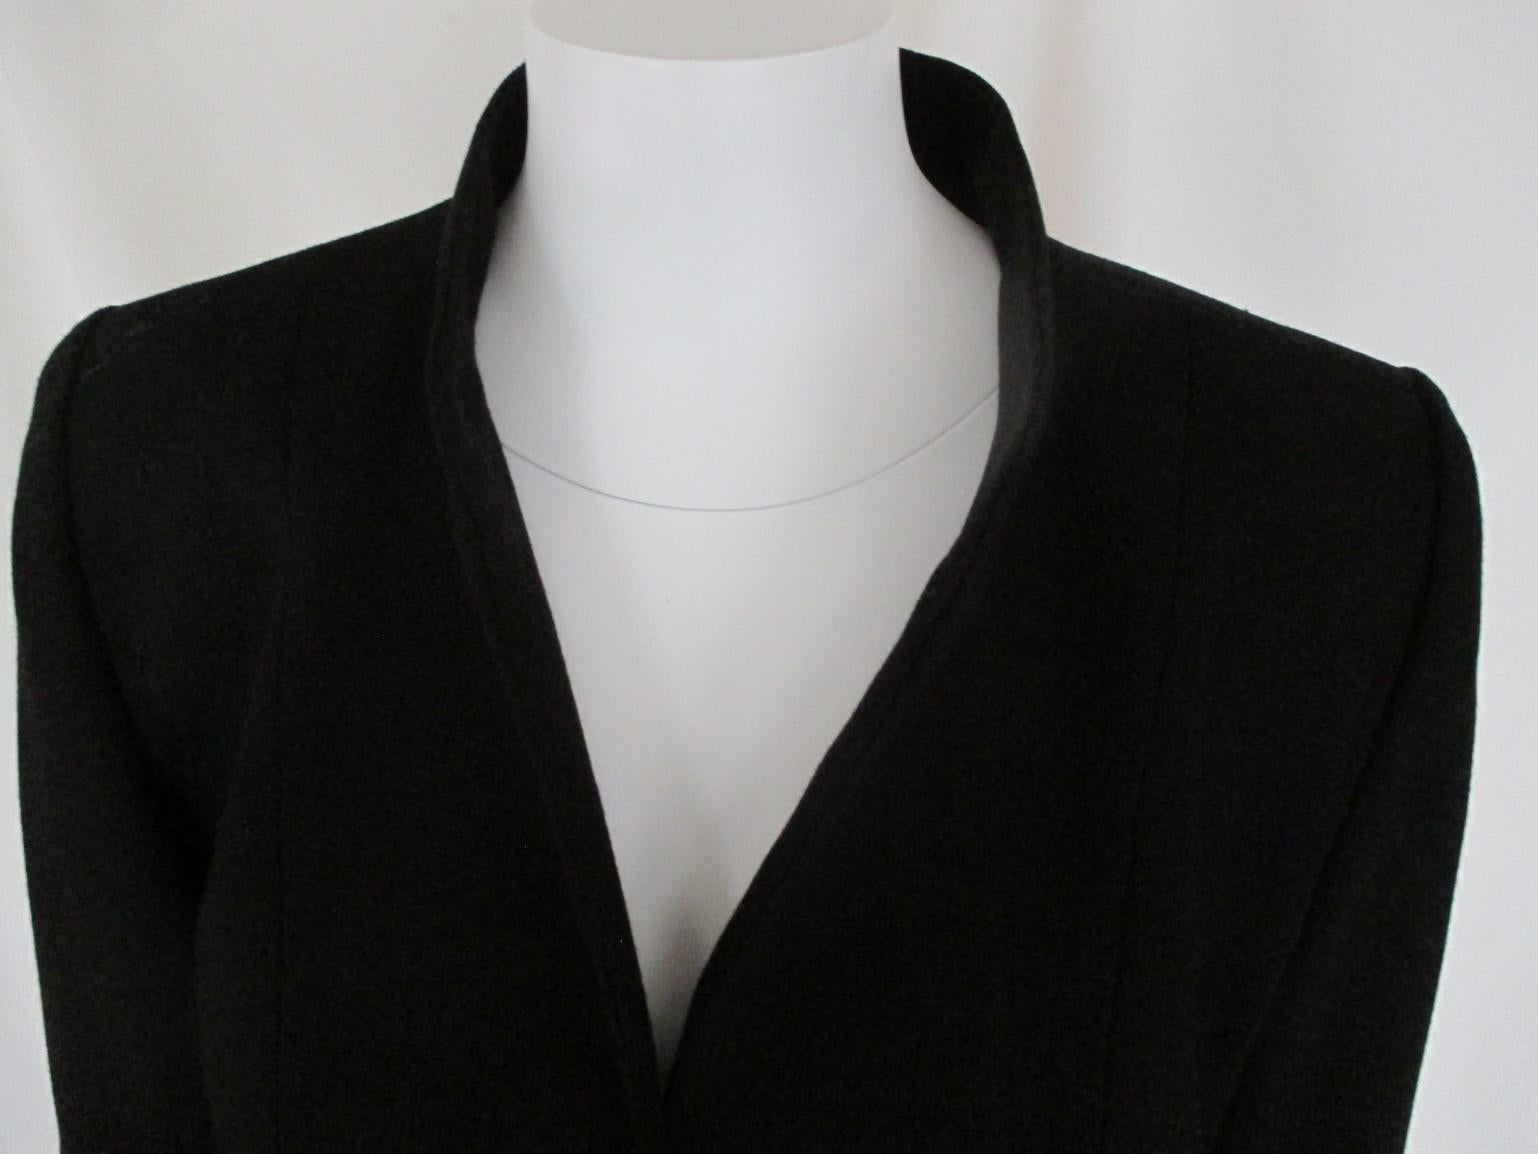 Vintage YSL black jacket with 3 gold color sun buttons at front and sleeves.
no pockets, 100% wool.
Size Appears to be France 42 and US 10, please refer to the measurements in the description.
Please note that vintage items are not new and therefore